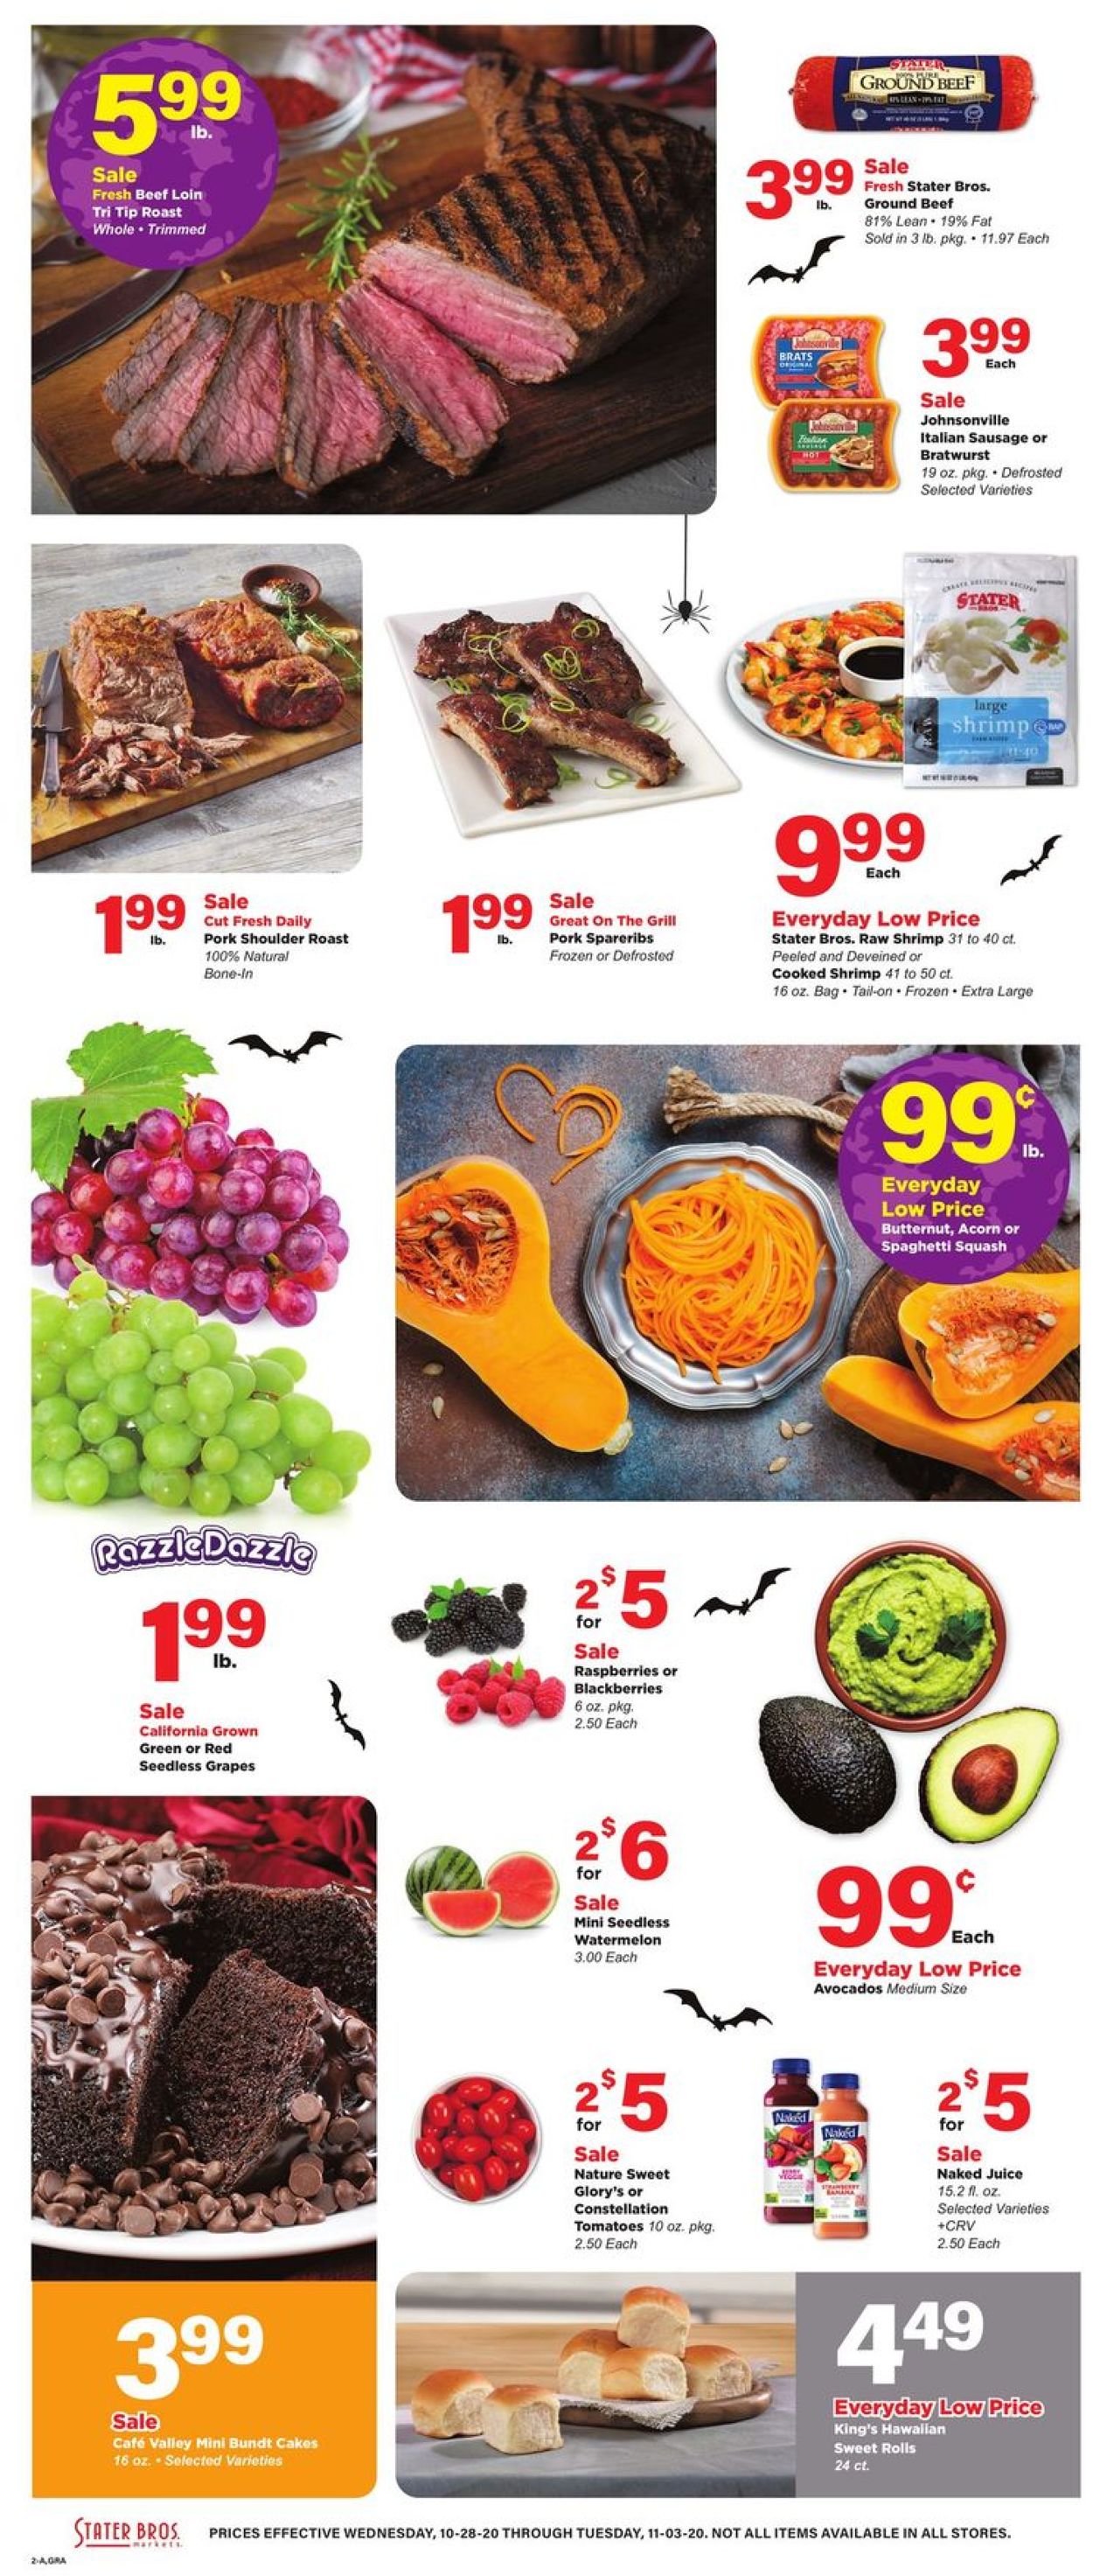 Stater Bros. Halloween 2020 Weekly Ad Circular - valid 10/28-11/03/2020 (Page 2)